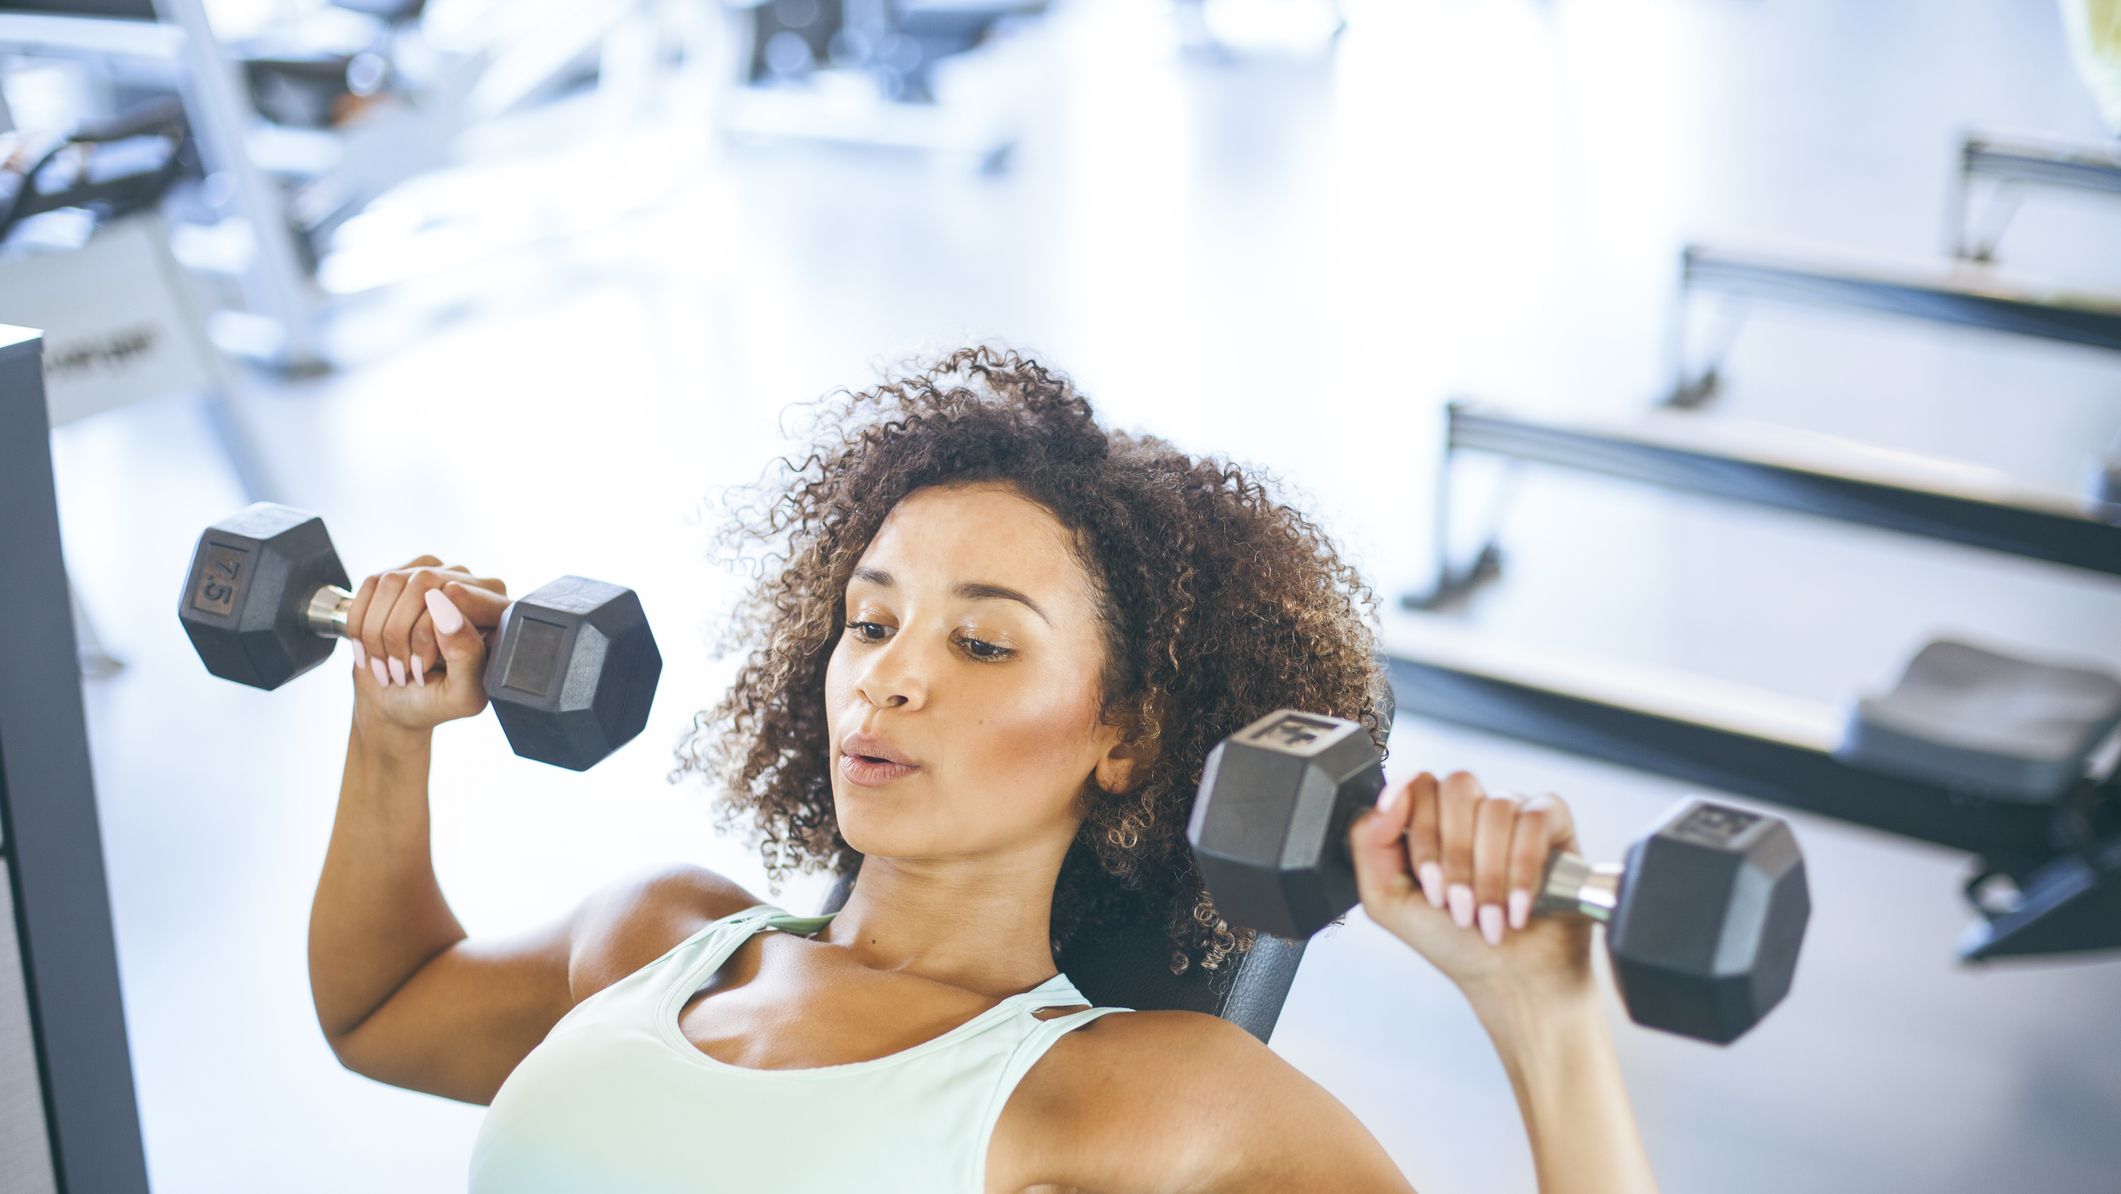 The Woman's Guide to Strength Training